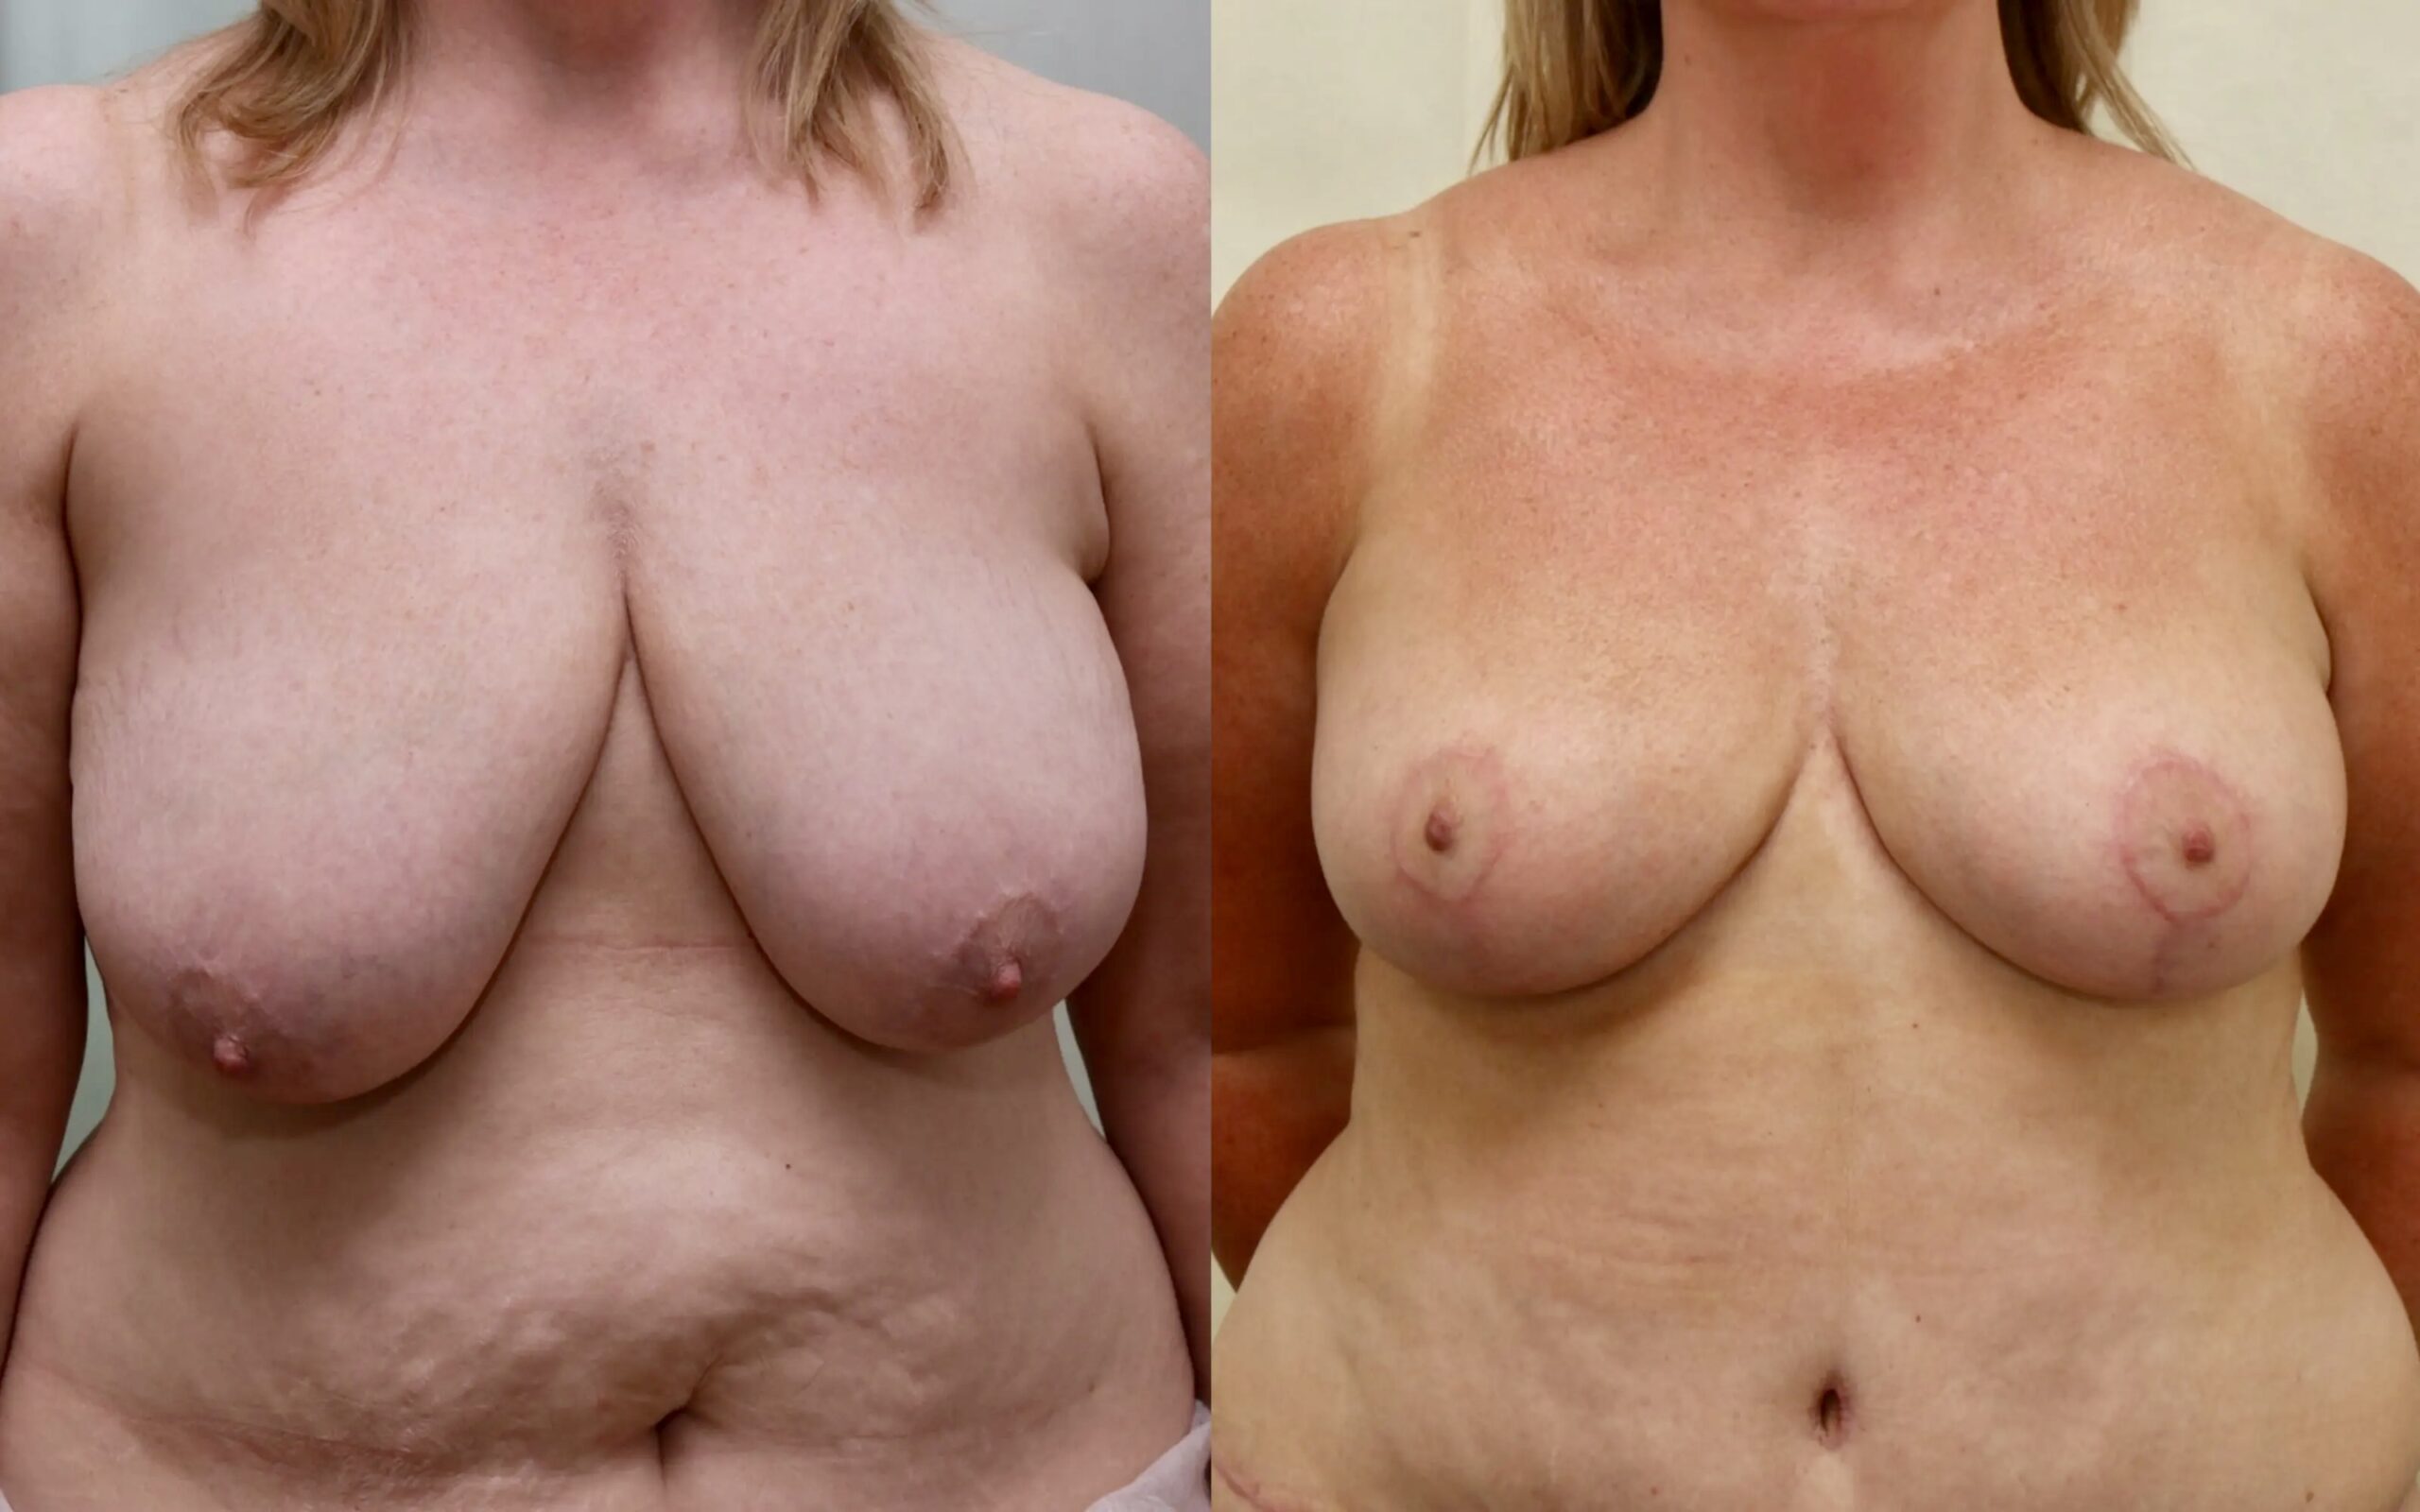 Breast reduction before and after - asymmetry